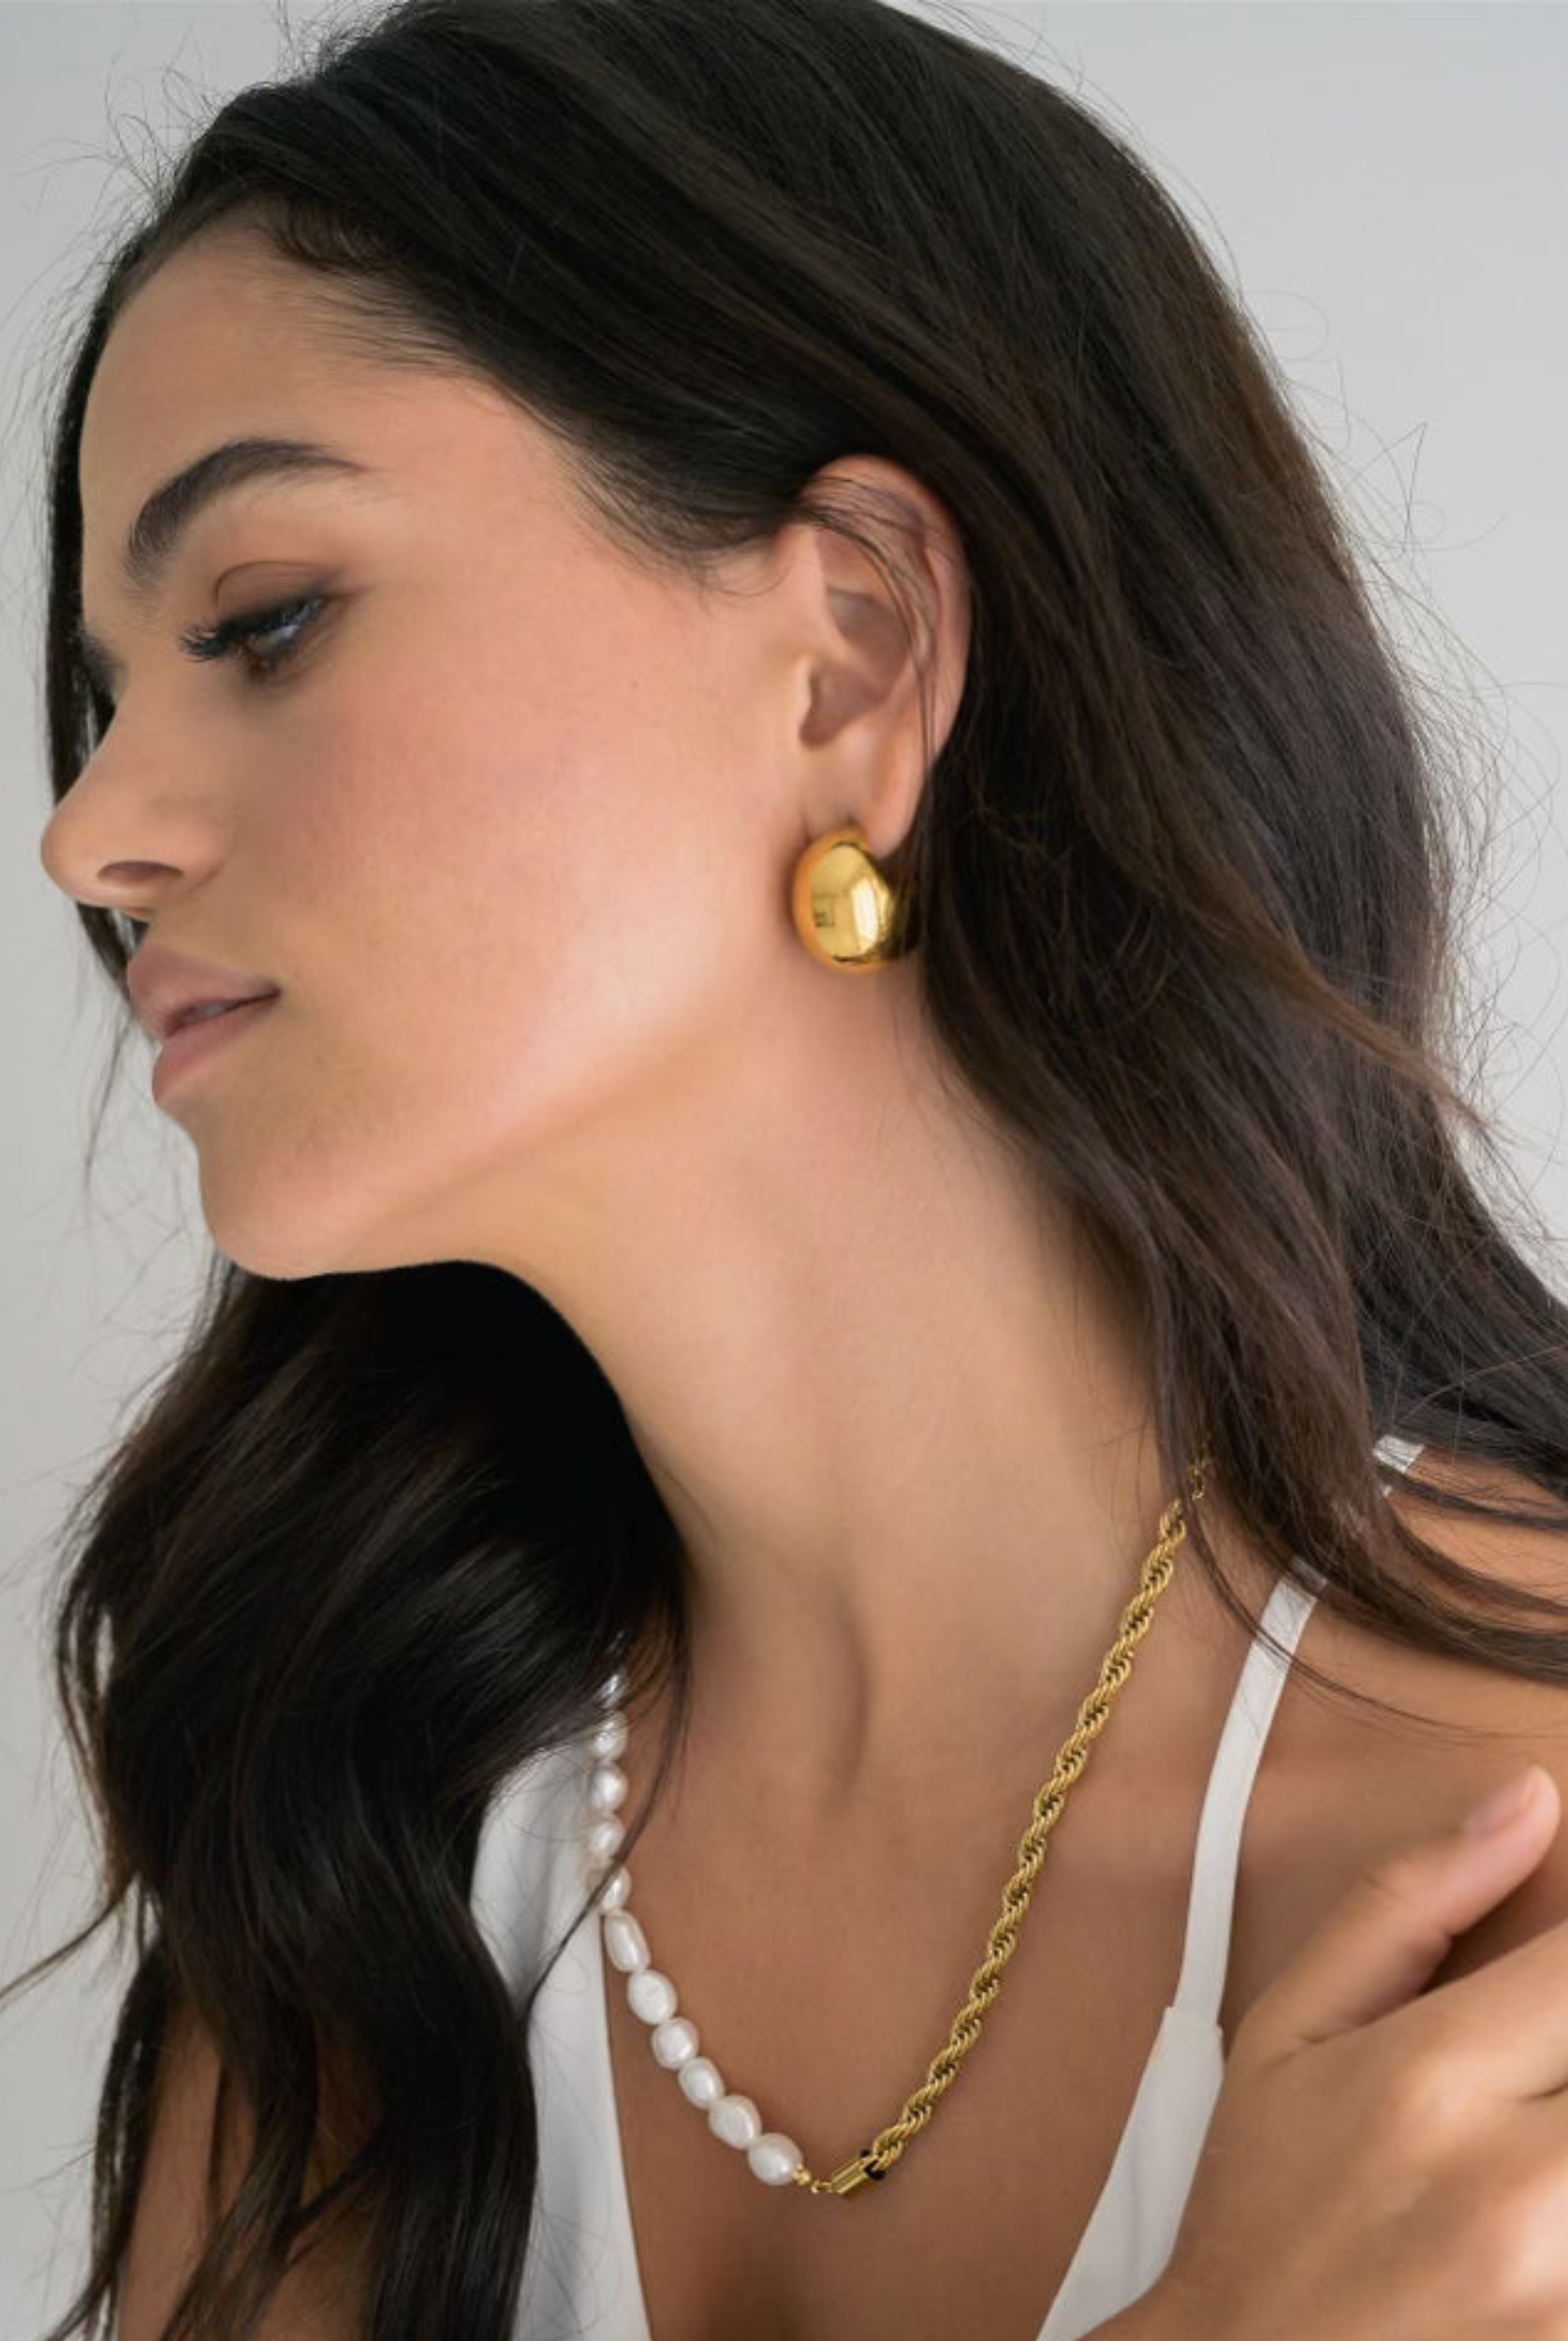 Round gold earrings from Indigo & Wolfe 